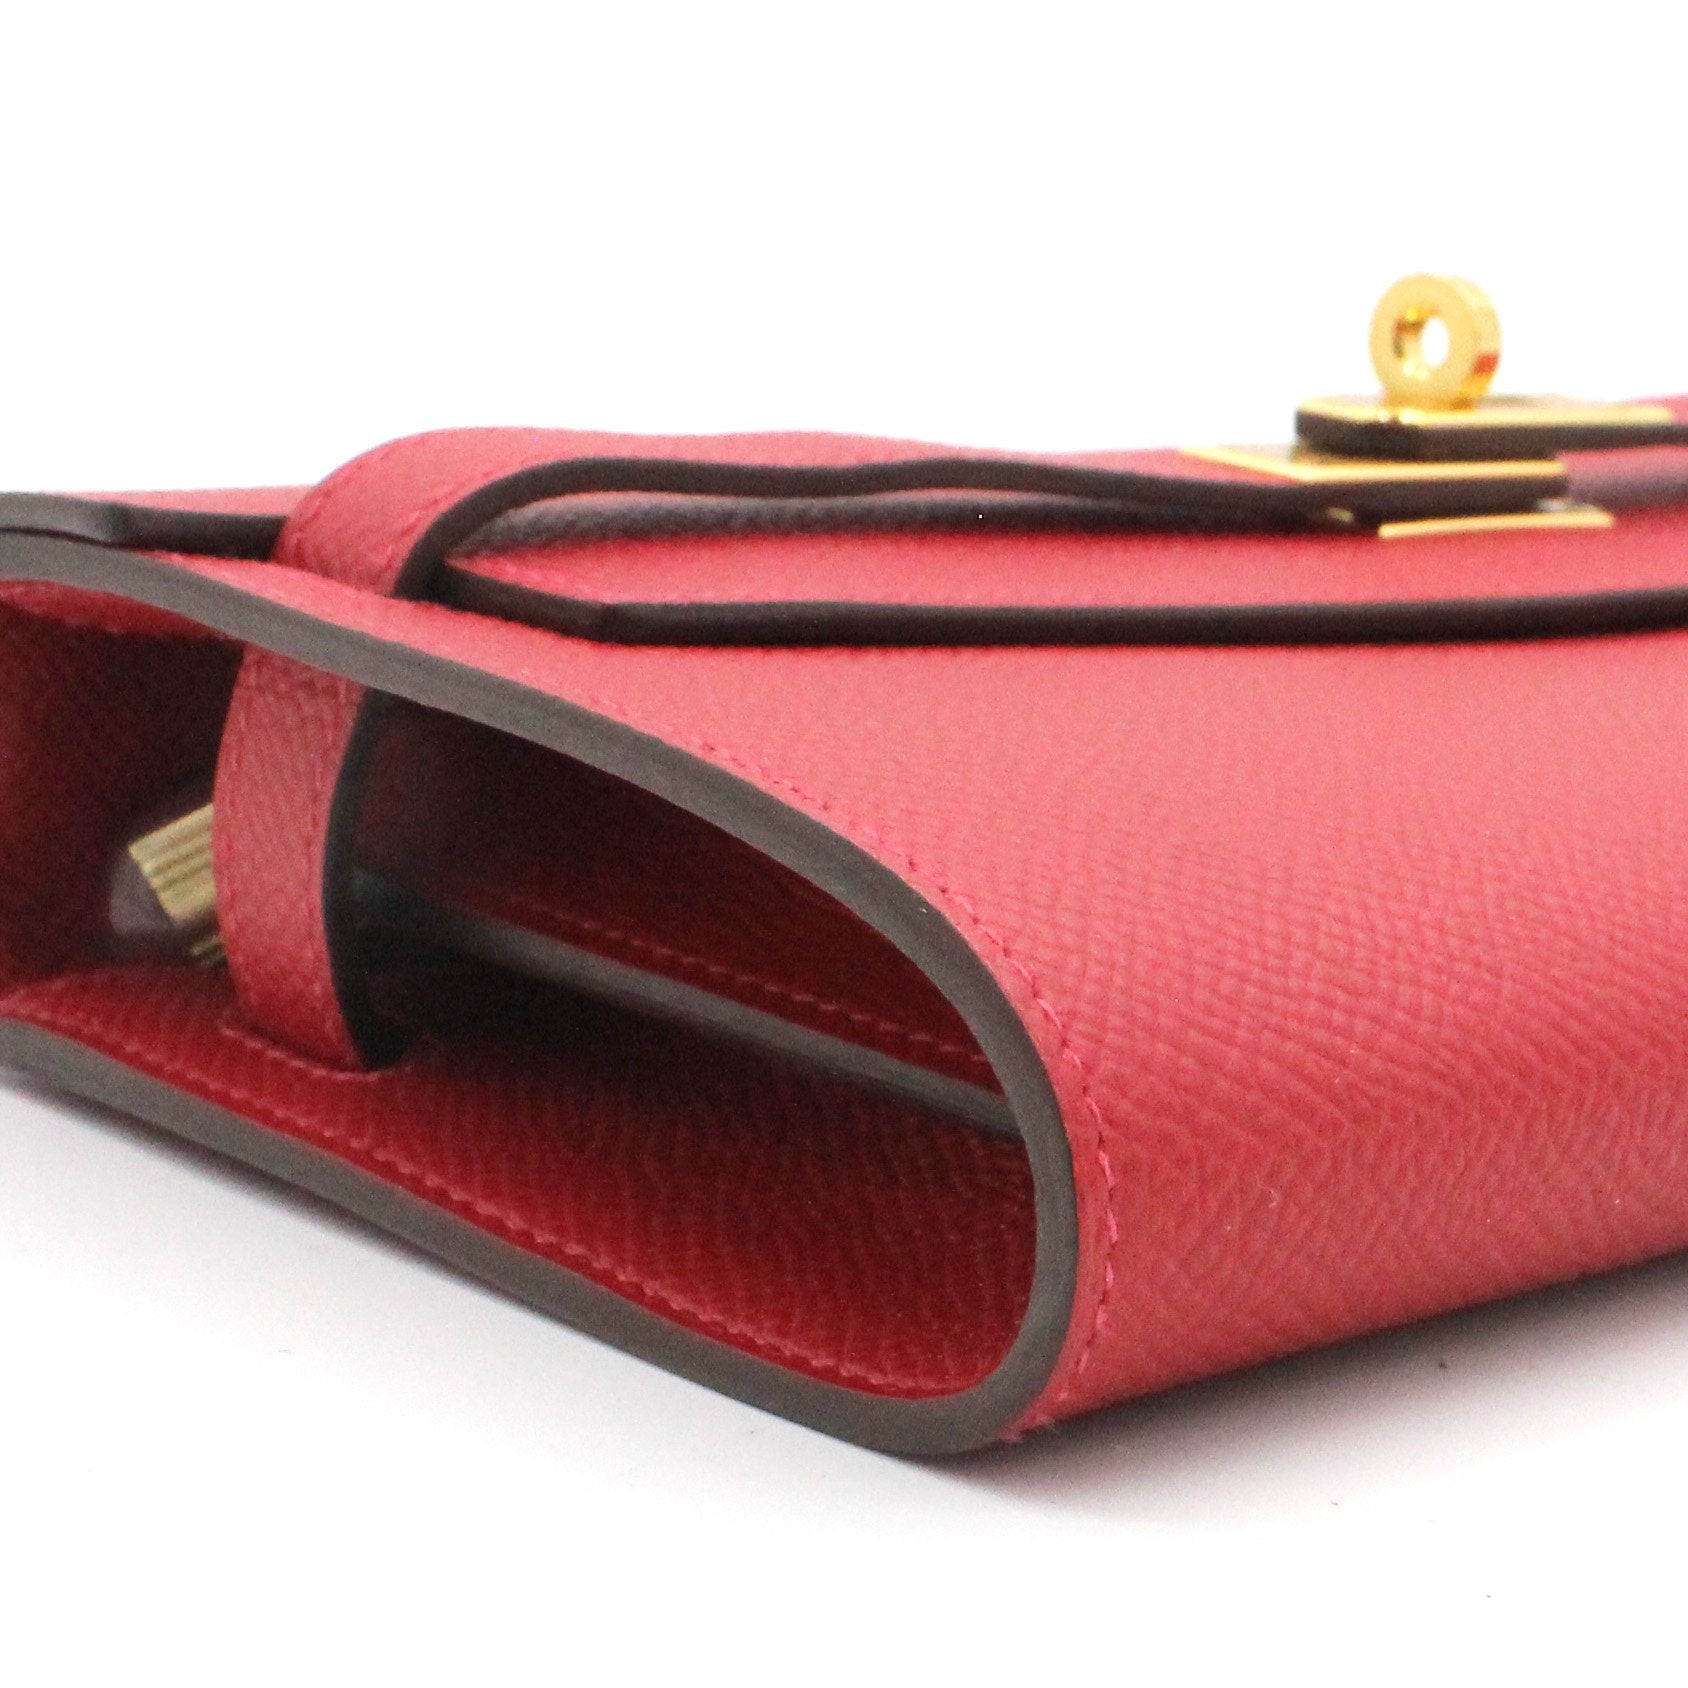 Kelly To Go clutch Q5 Rouge Casaque